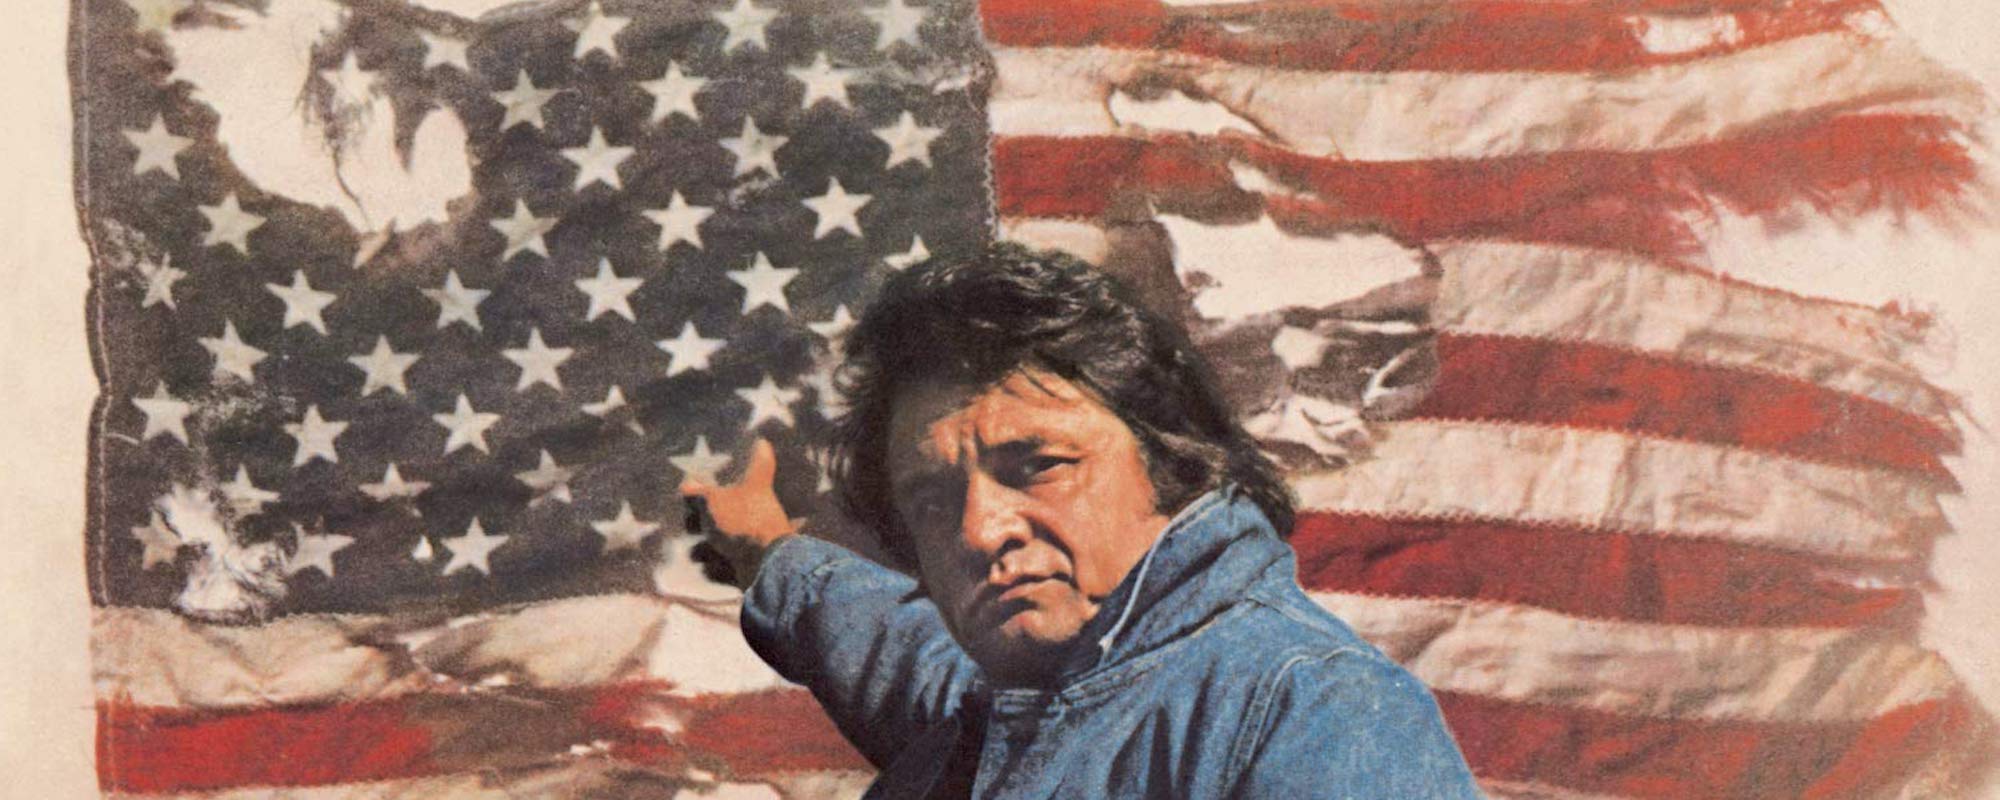 Behind the Song Lyrics: “Ragged Old Flag” by Johnny Cash